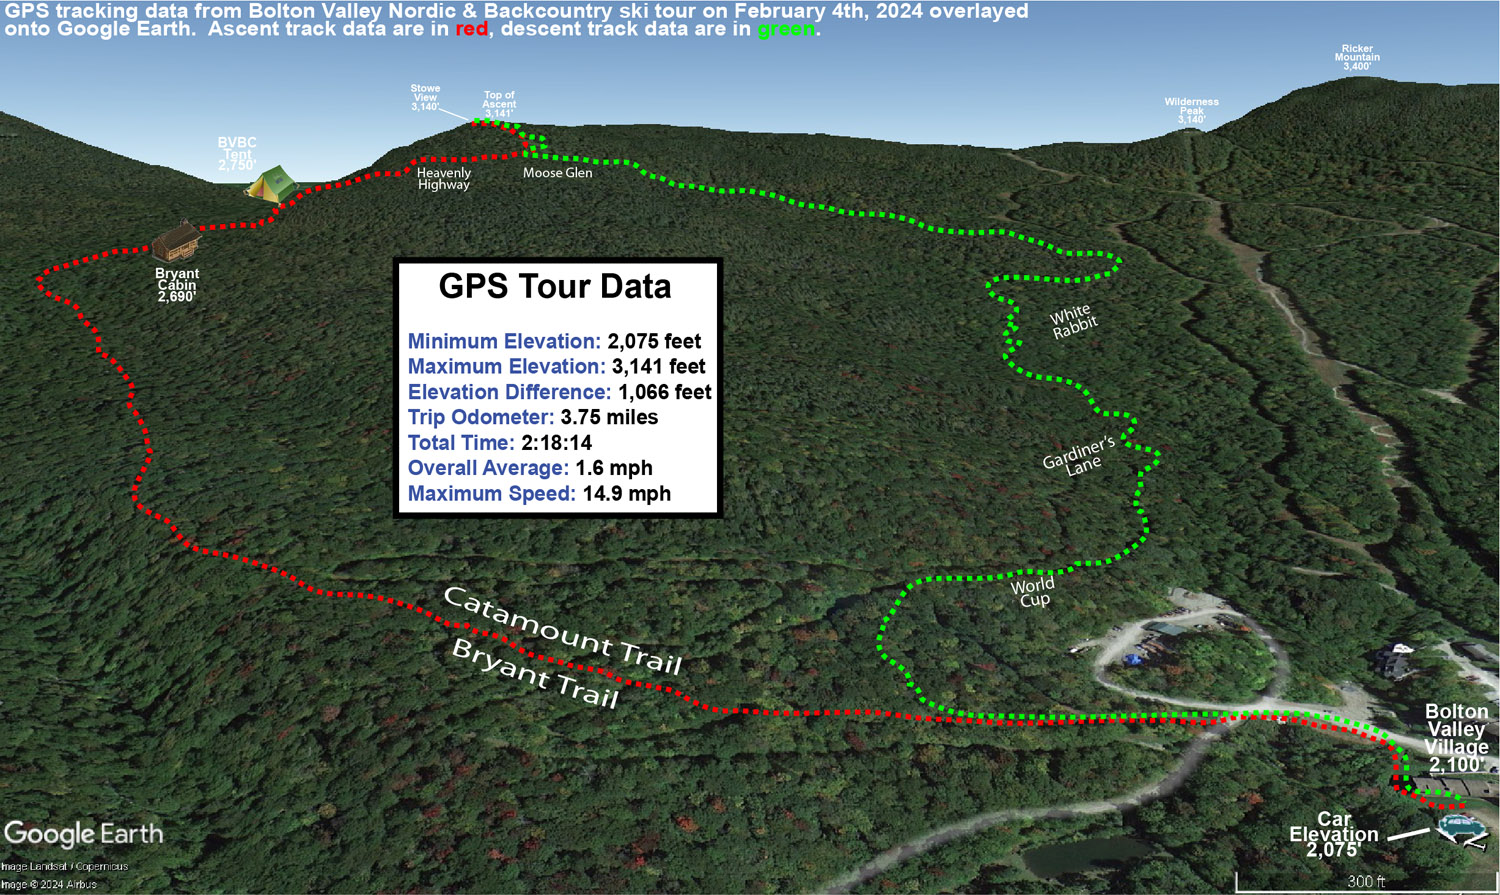 A Google Earth map with GPS tracking data showing the route of a ski tour on the Nordic and Backcountry Network of trails at Bolton Valley Ski Resort in Vermont